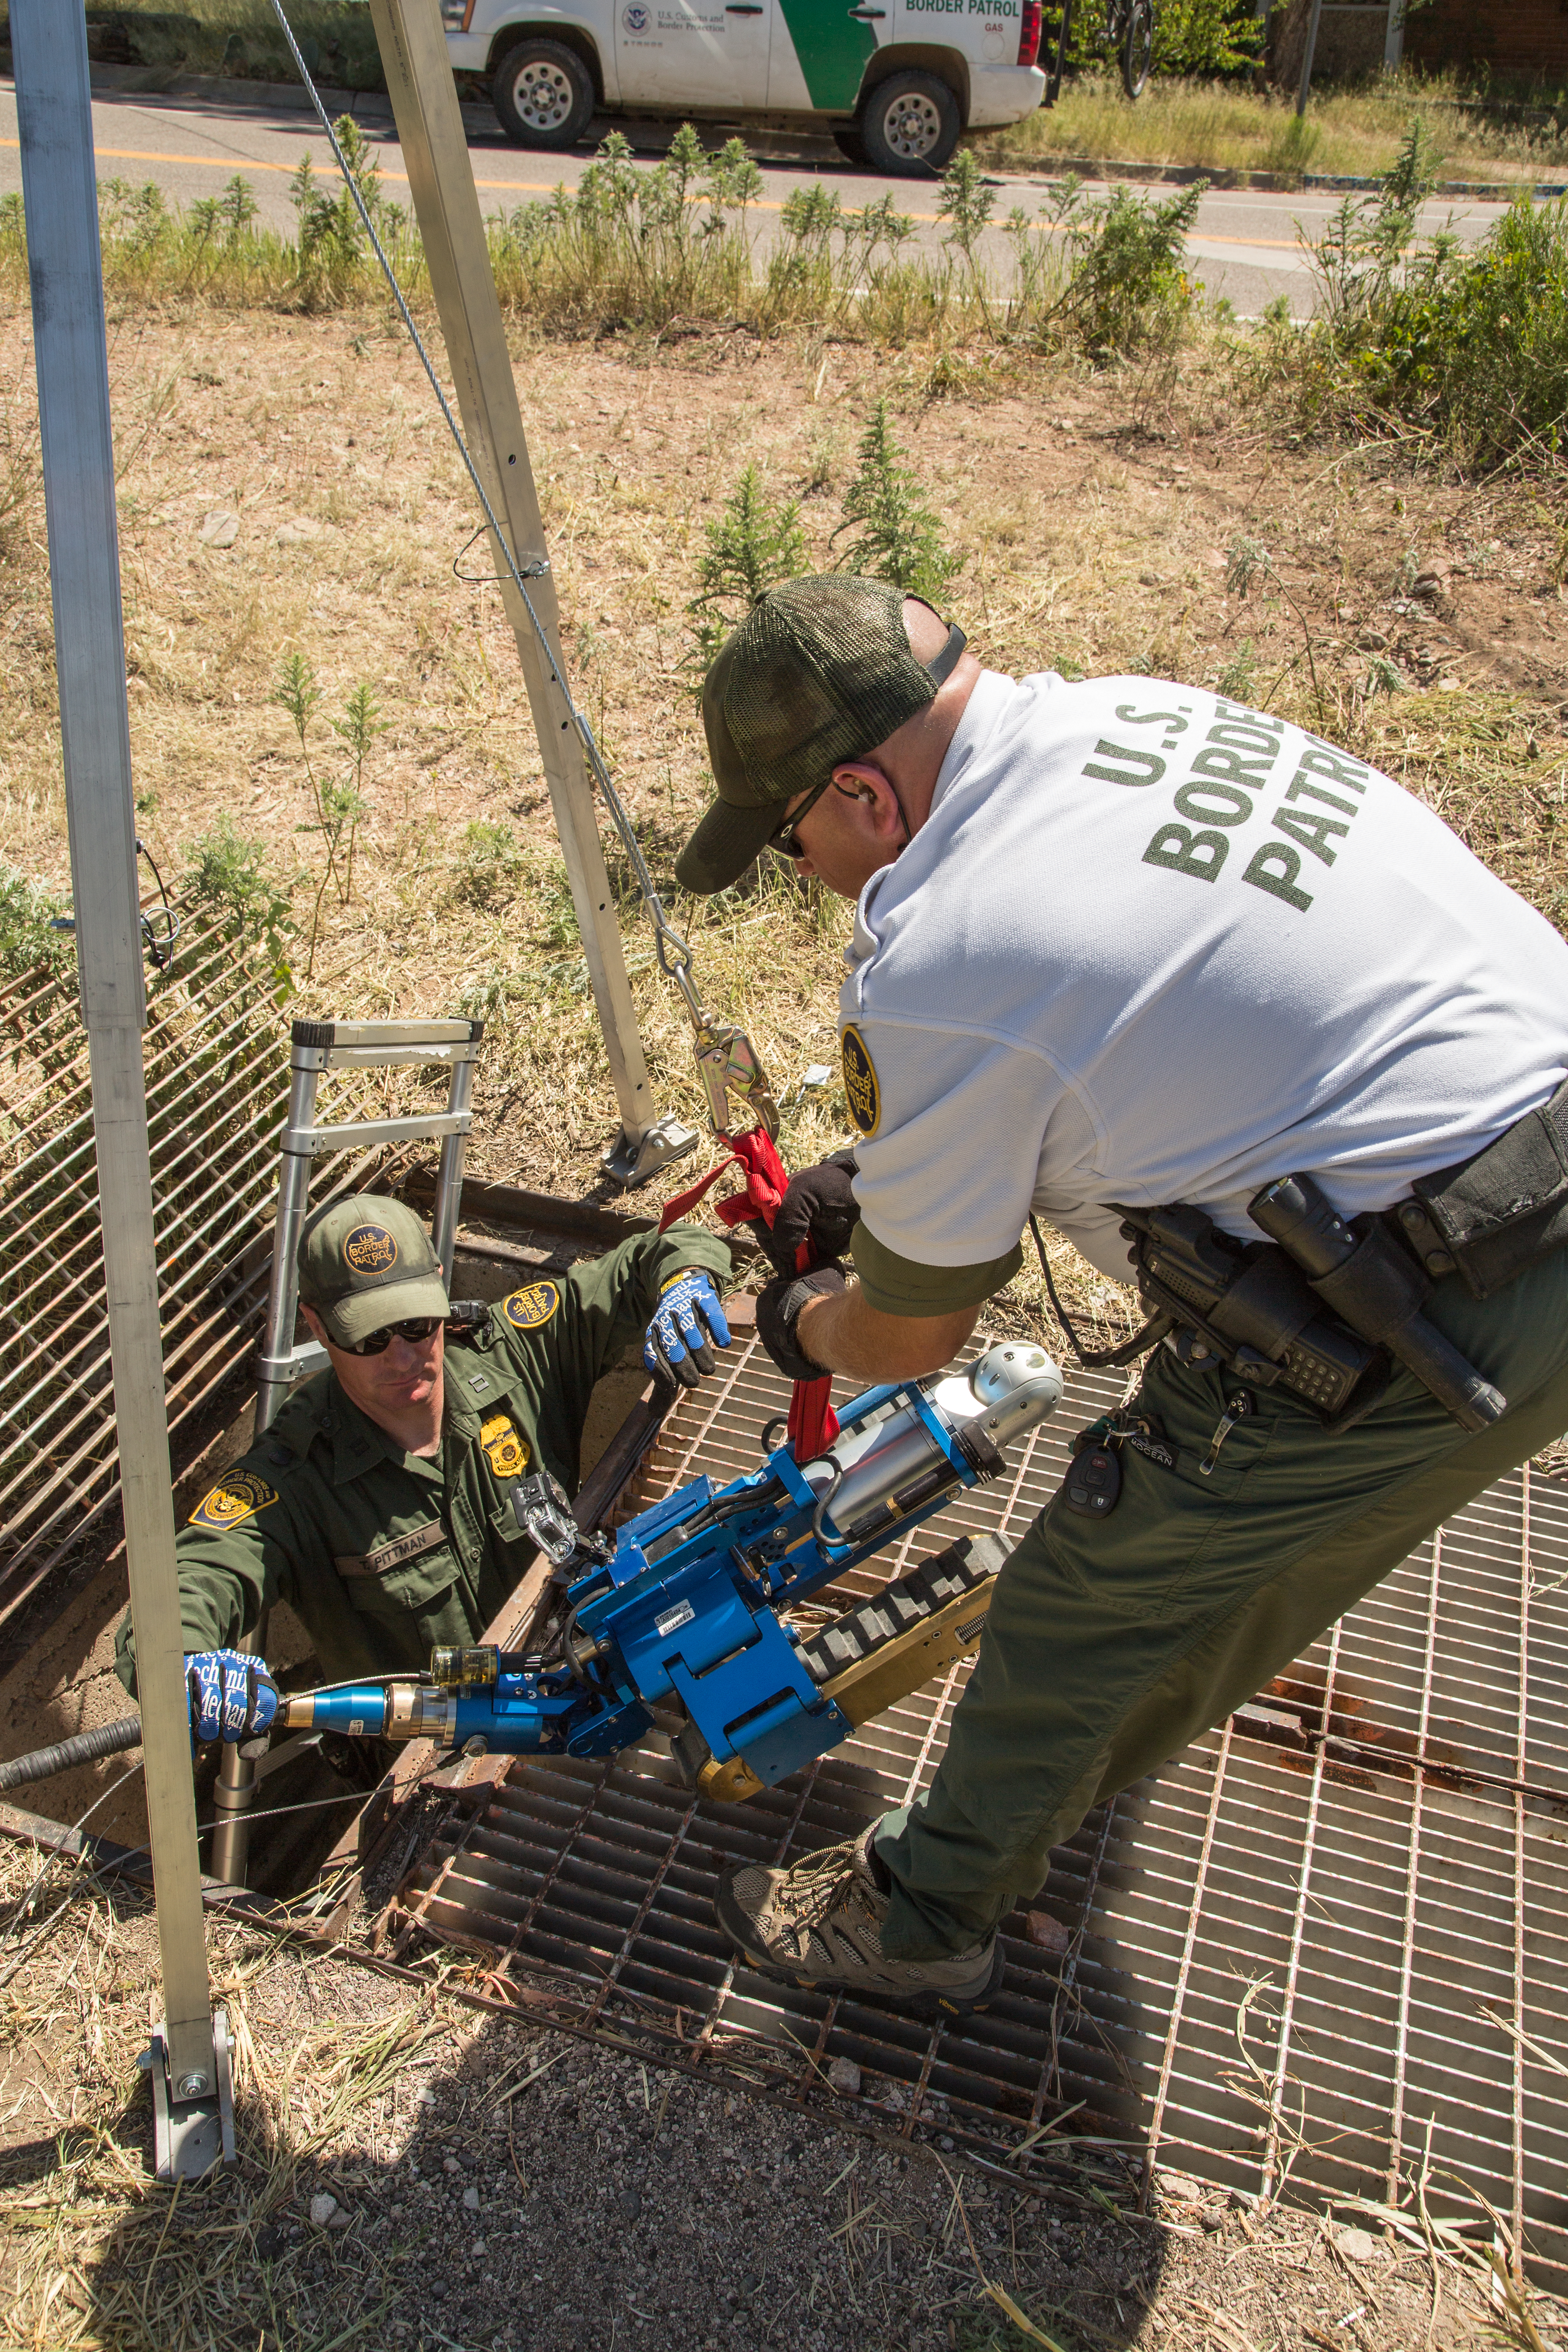 Border Patrol agents pull the robot back to the surface after its search mission is complete.